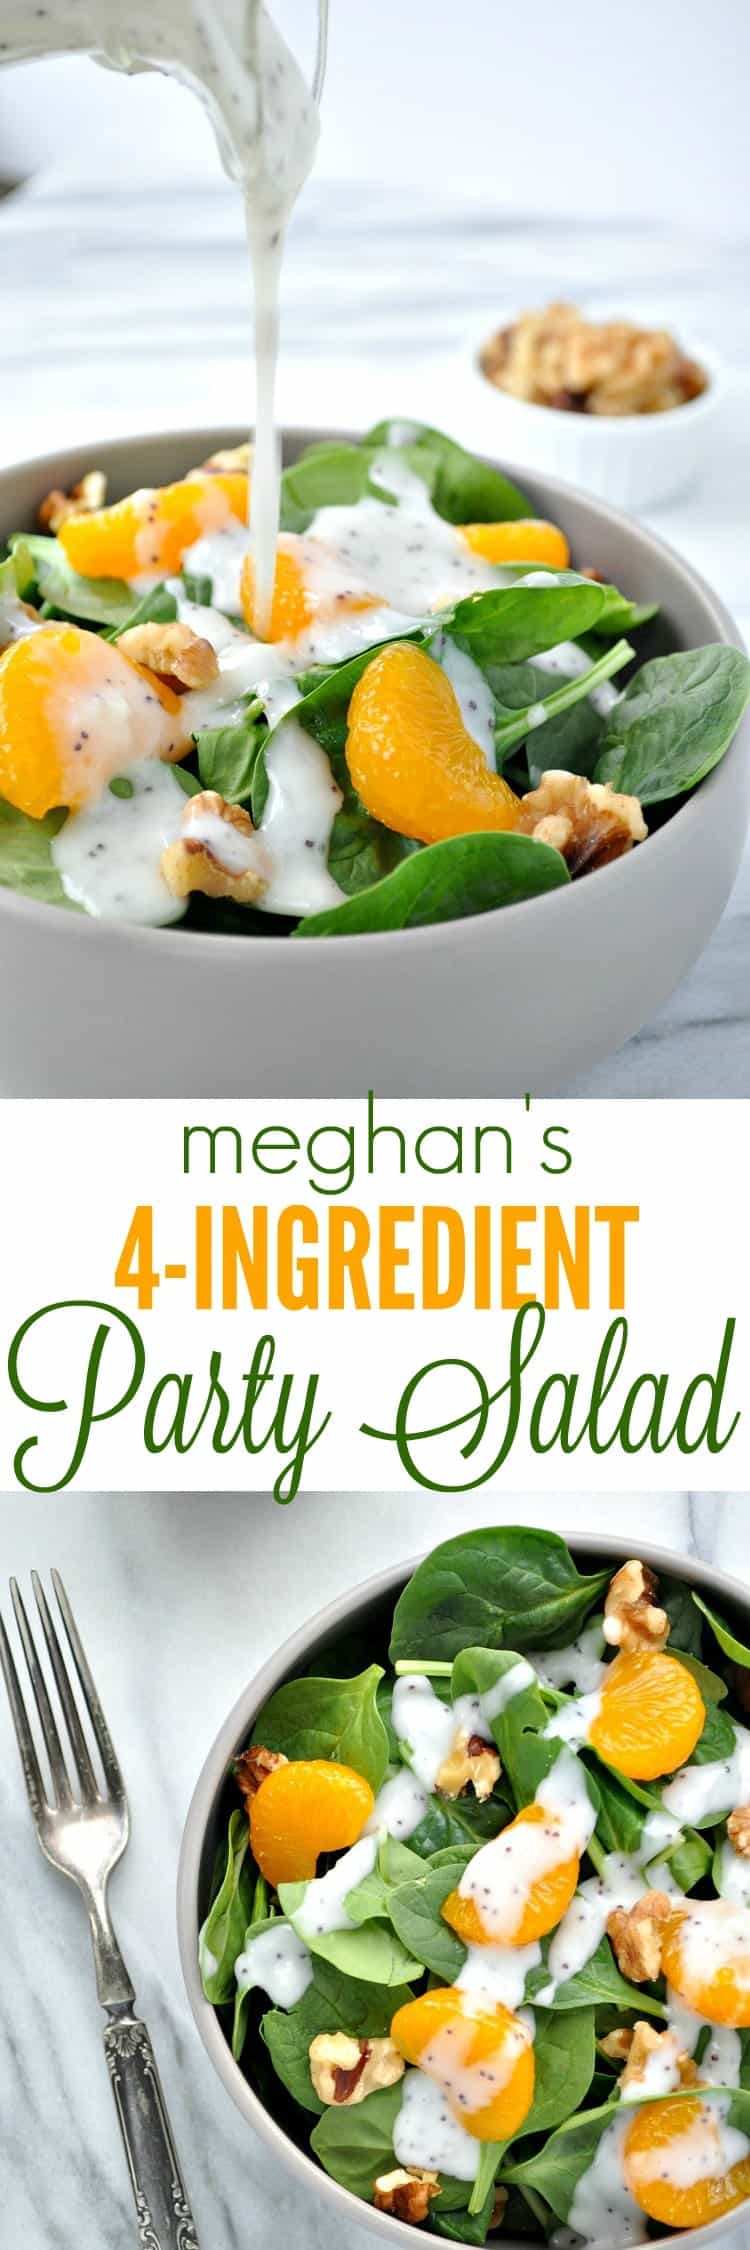 Meghan's 4-Ingredient Party Salad is too easy and too delicious...I just HAD to share the recipe!